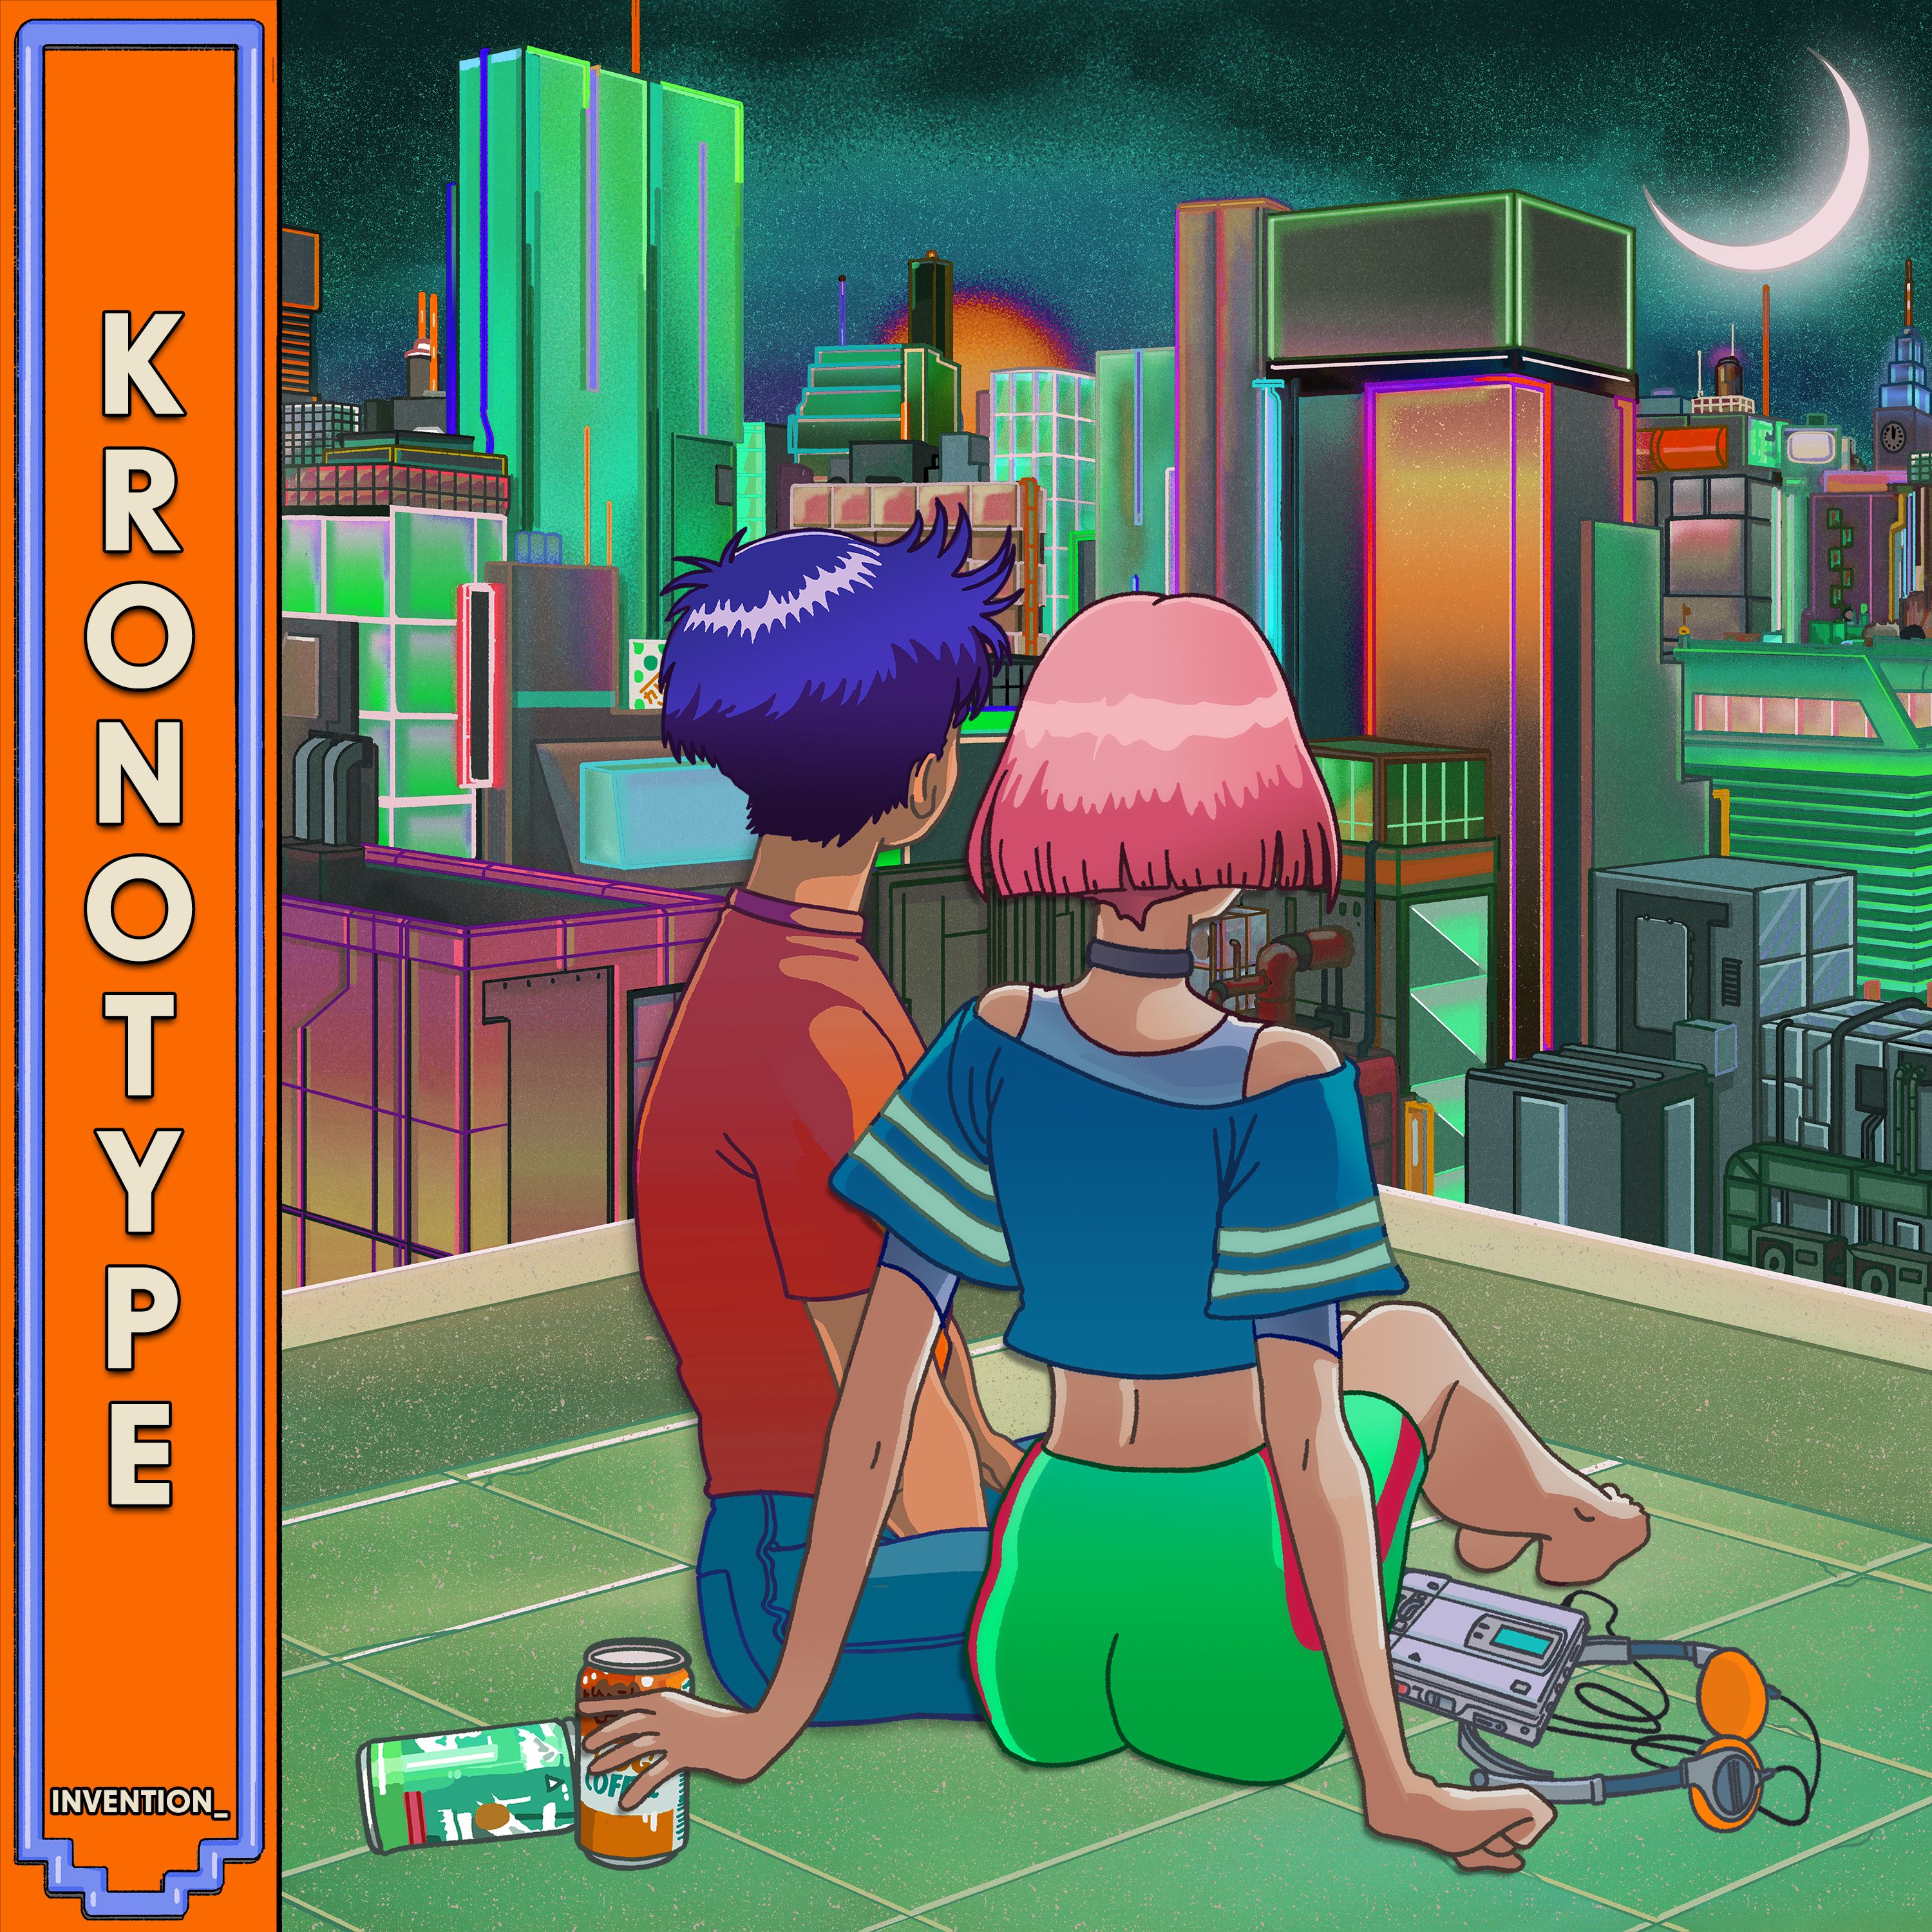 Download invention_  - Kronotype